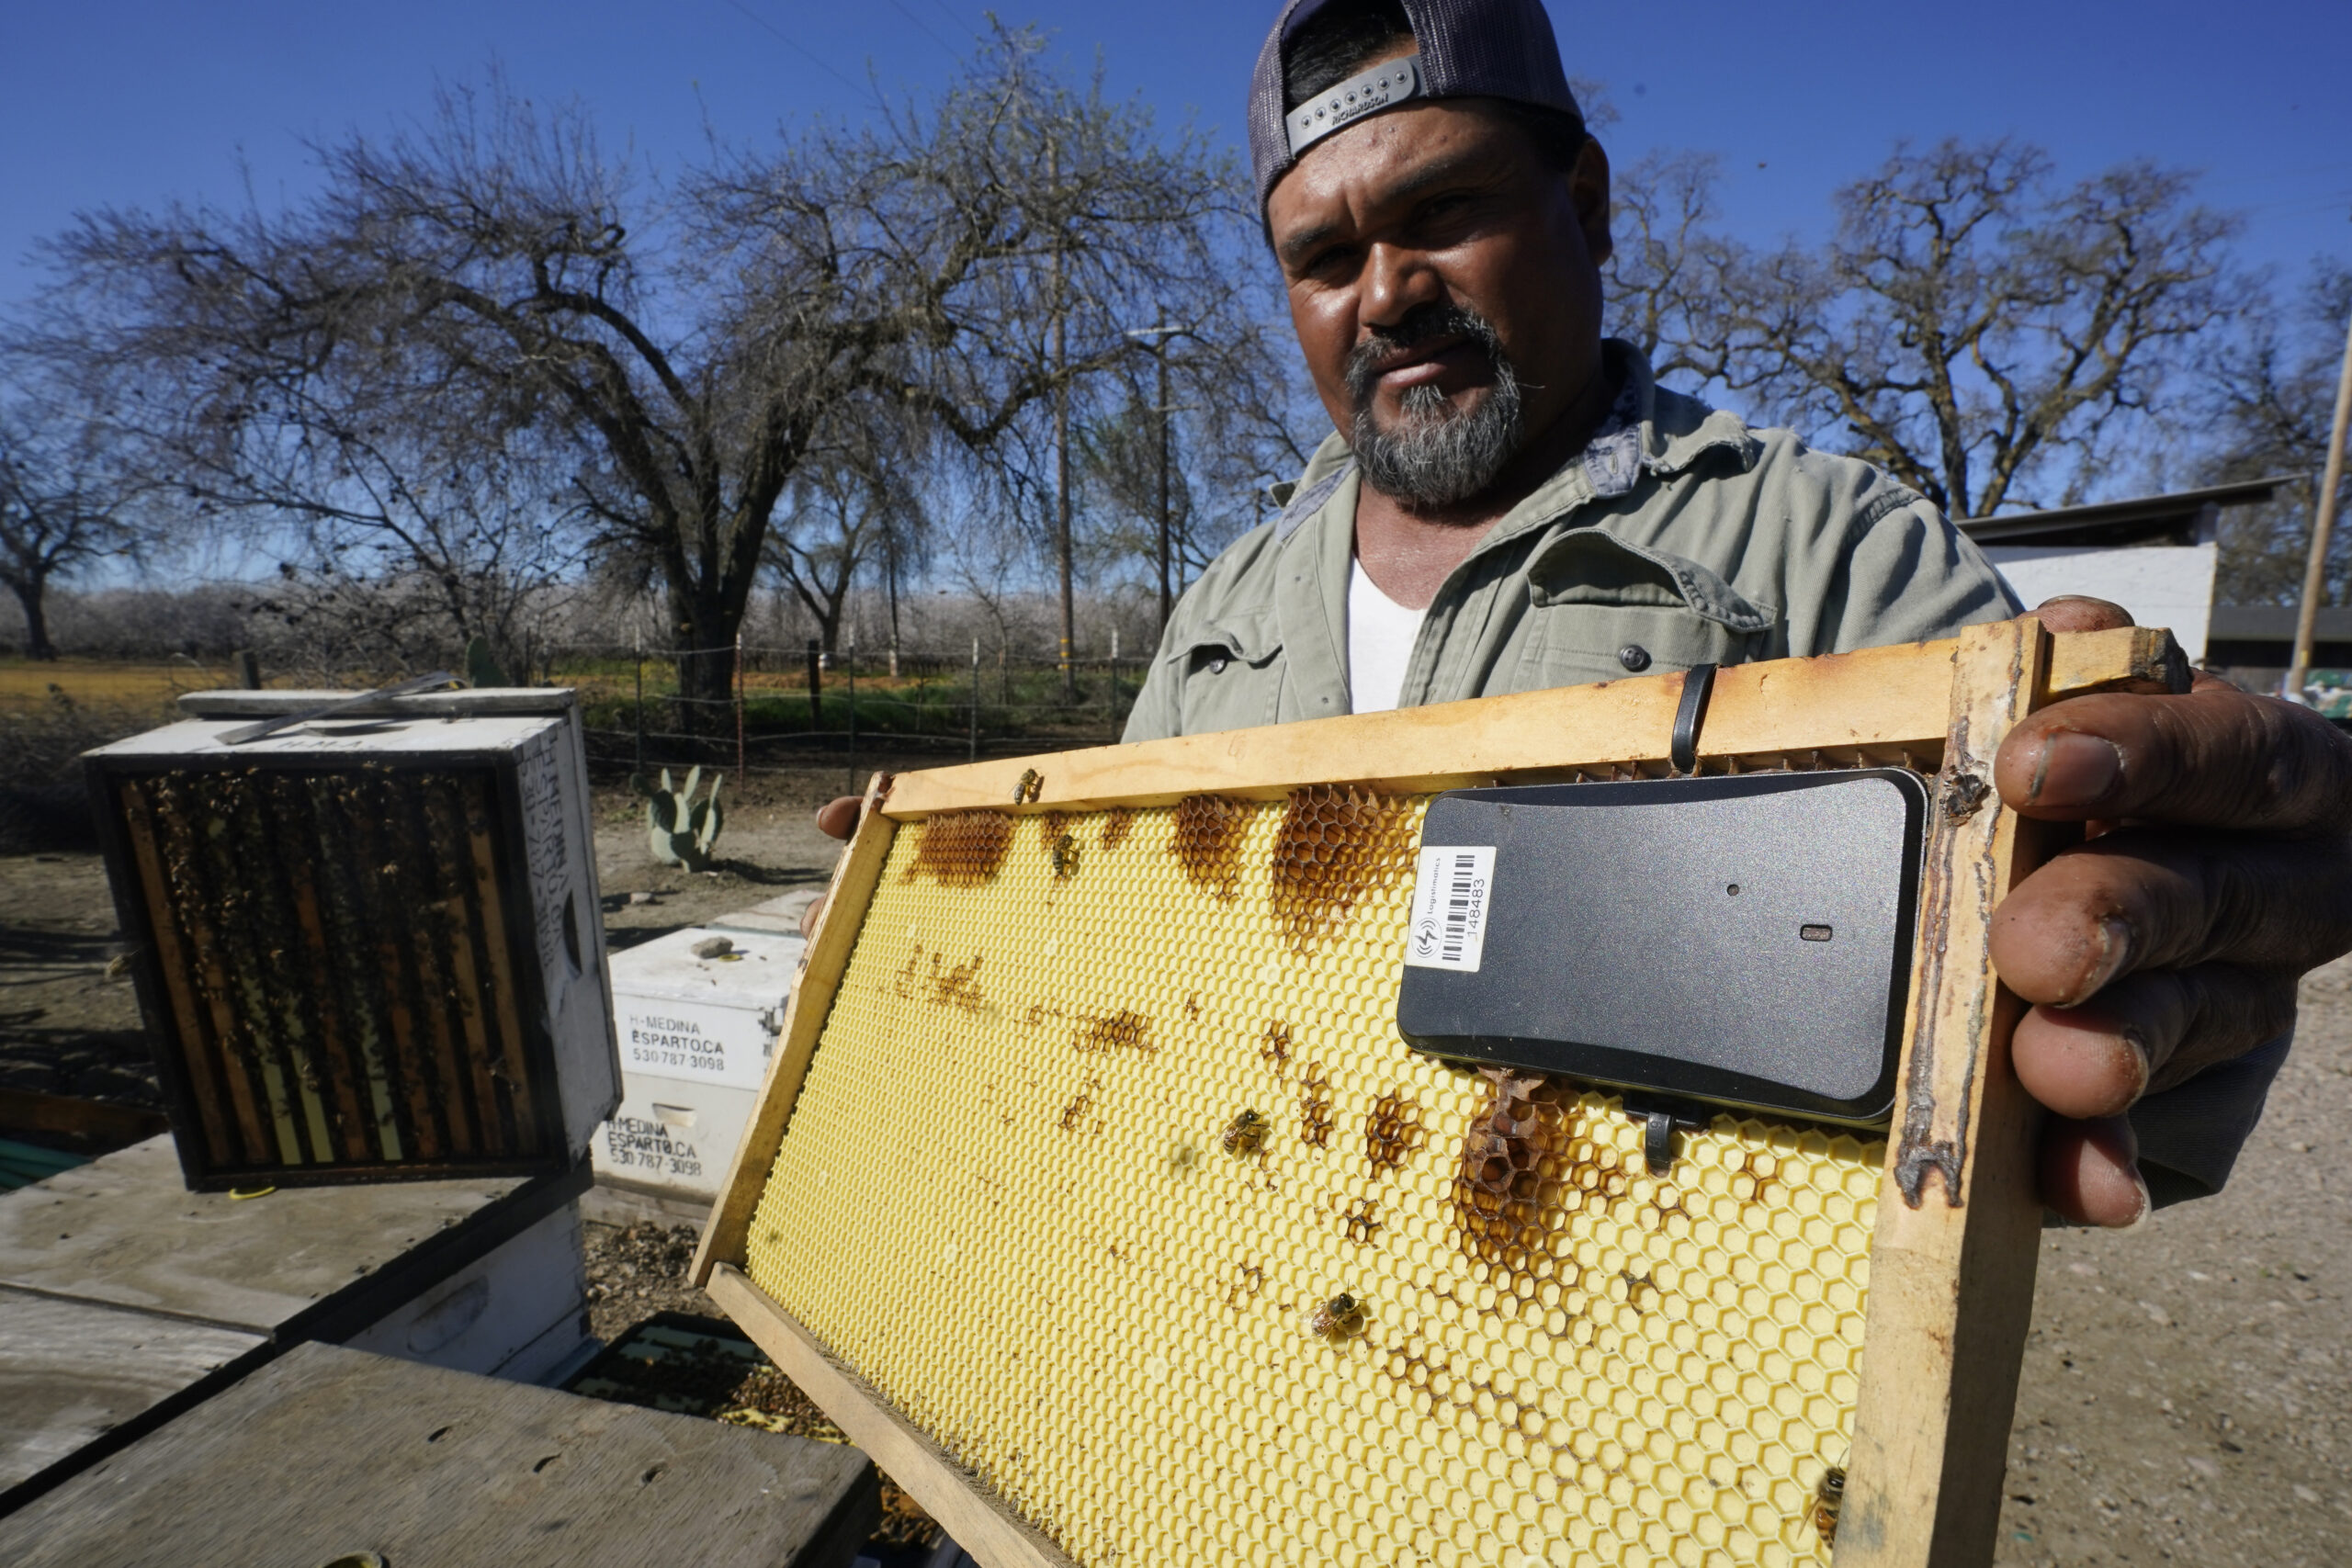 Beekeeper Hello Medina displays a beehive frame outfitted with a GPS locater that will be installed in one of the beehives he rents out, in Woodland, Calif., Thursday, Feb. 17, 2022. As almond flowers start to bloom, beekeepers rent their hives out to farmers to pollinate California's most valuable crop, but with the blossoms come beehive thefts. Medina says last year he lost 282 hives estimated to be worth $100,000, and is now installing GPS-enabled sensors to help find the stolen hives. (AP Photo/Rich Pedroncelli)